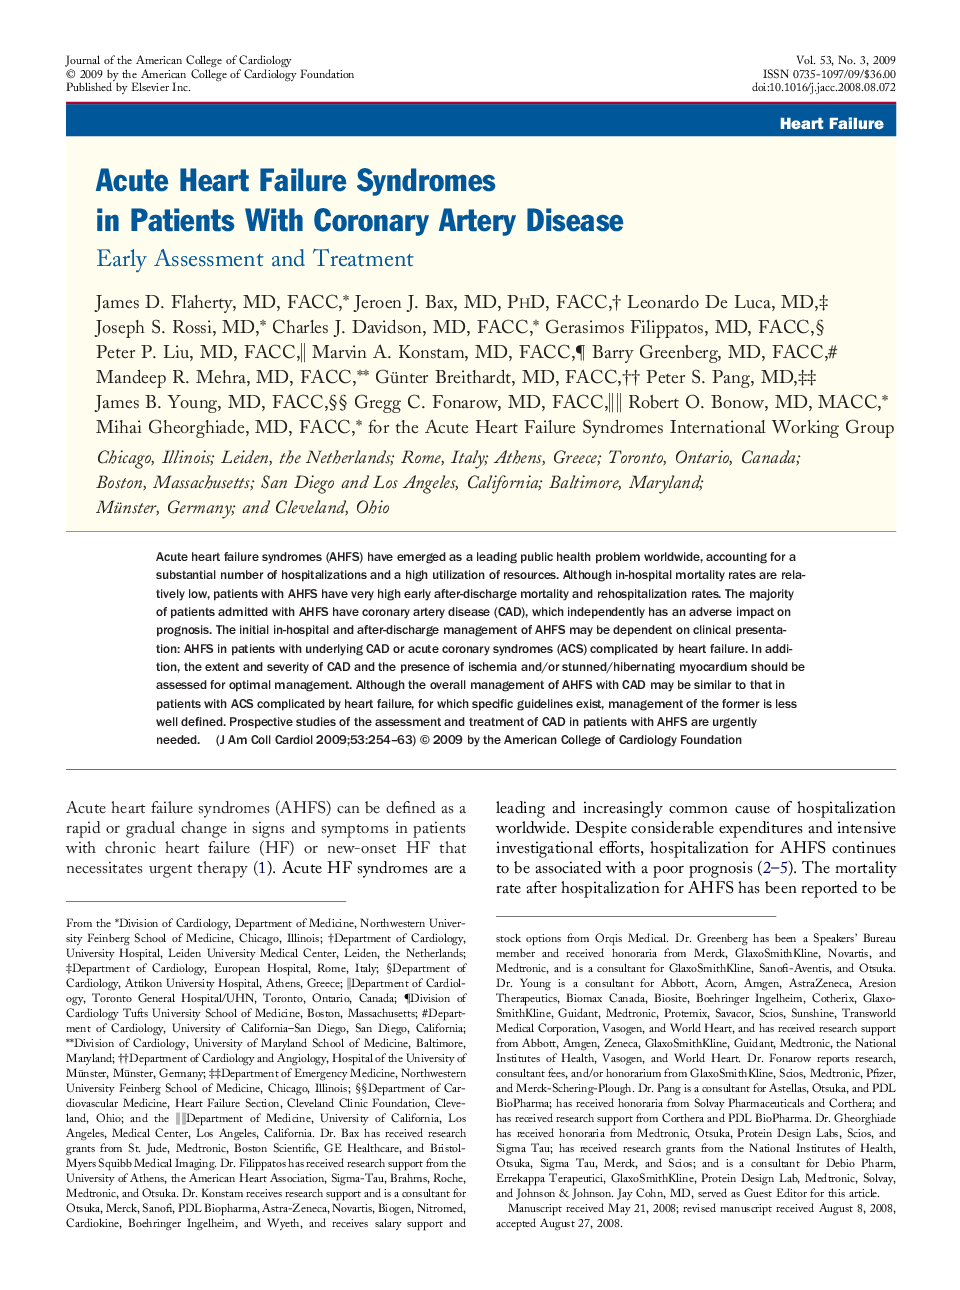 Acute Heart Failure Syndromes in Patients With Coronary Artery Disease : Early Assessment and Treatment